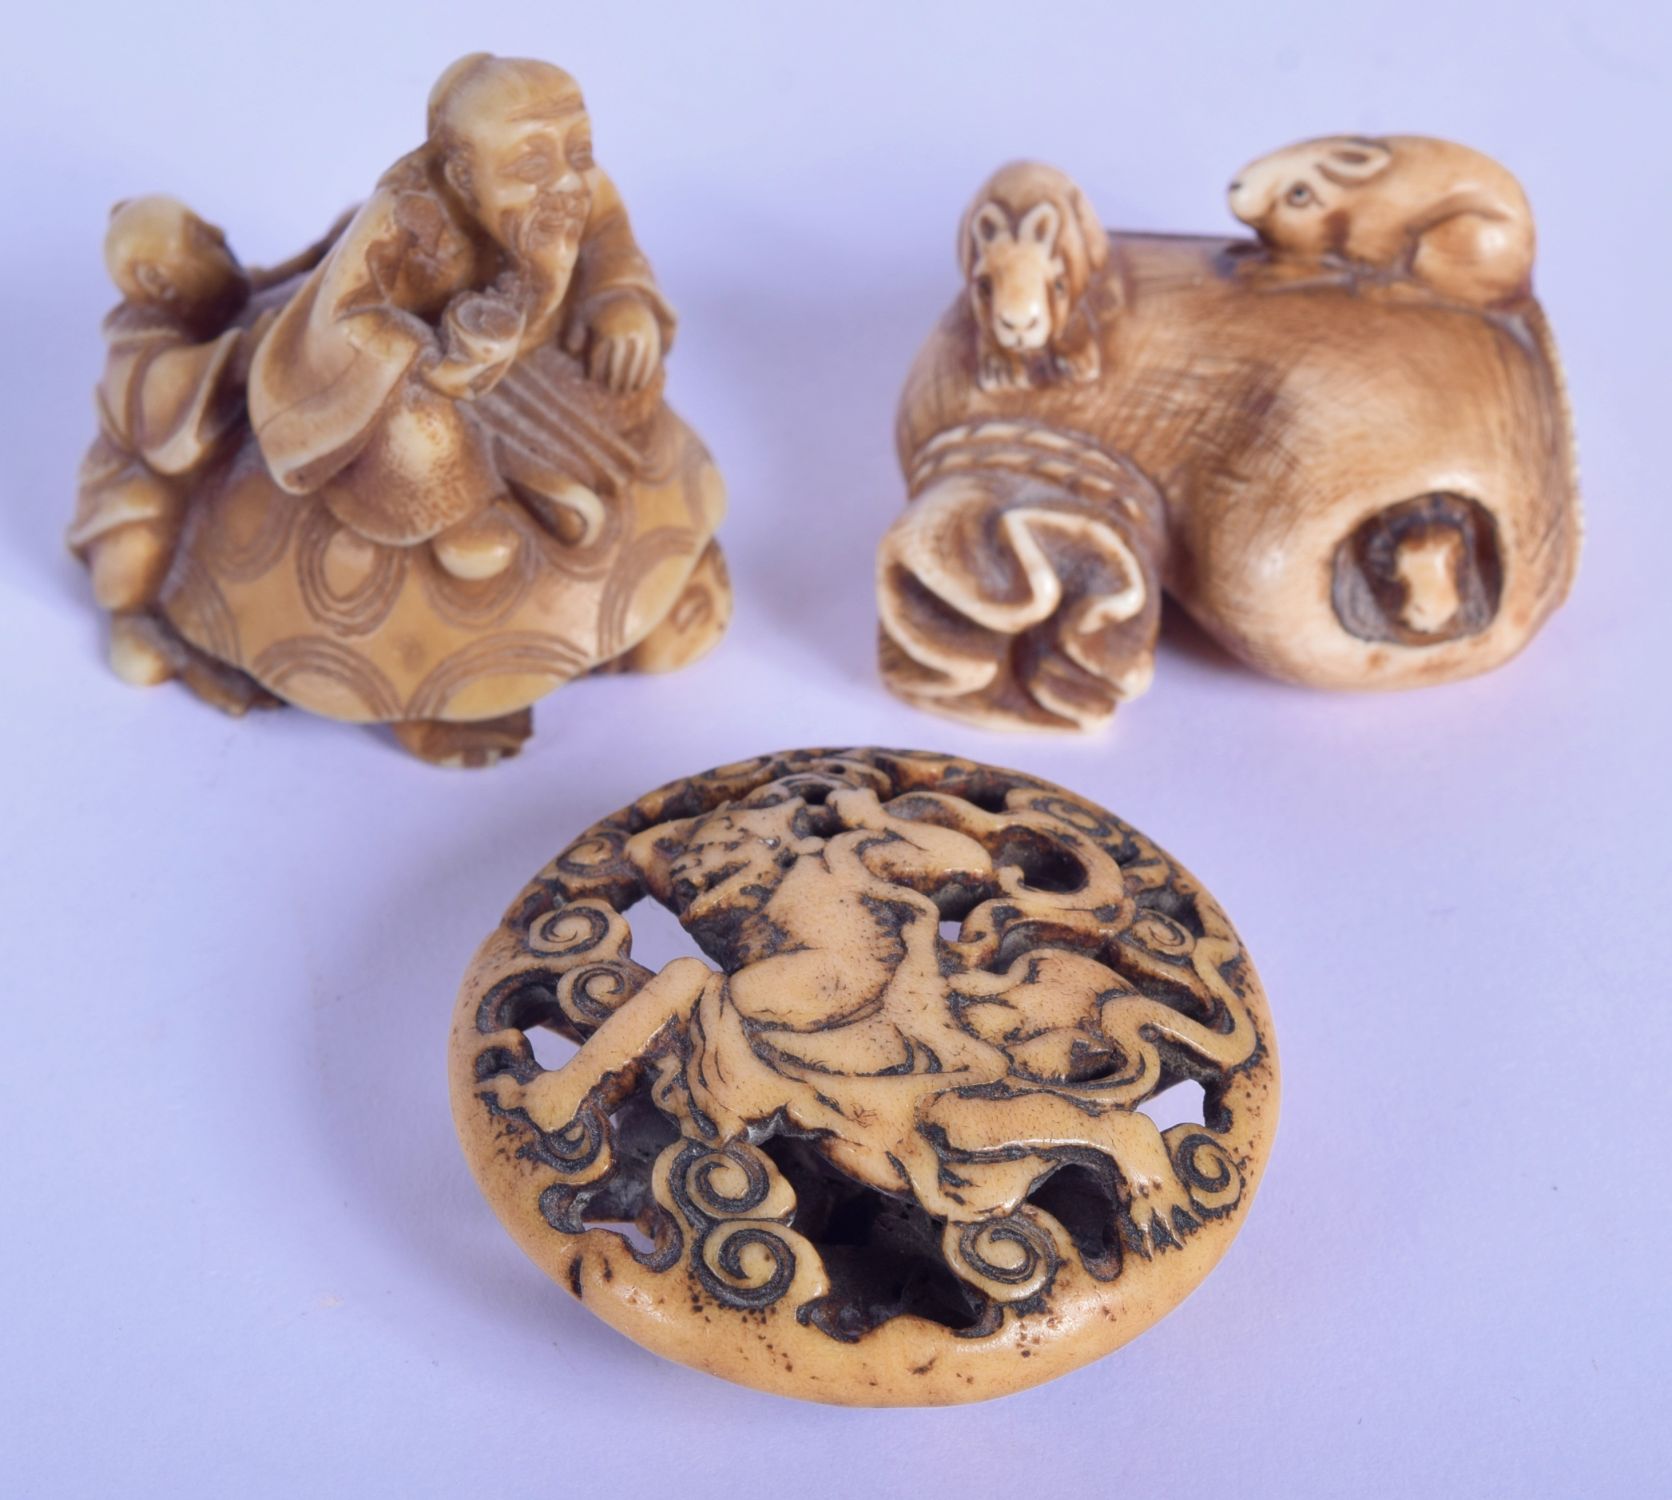 AN 18TH/19TH CENTURY JAPANESE EDO PERIOD CARVED STAG ANTLER MANJU NETSUKE together with a stone nets